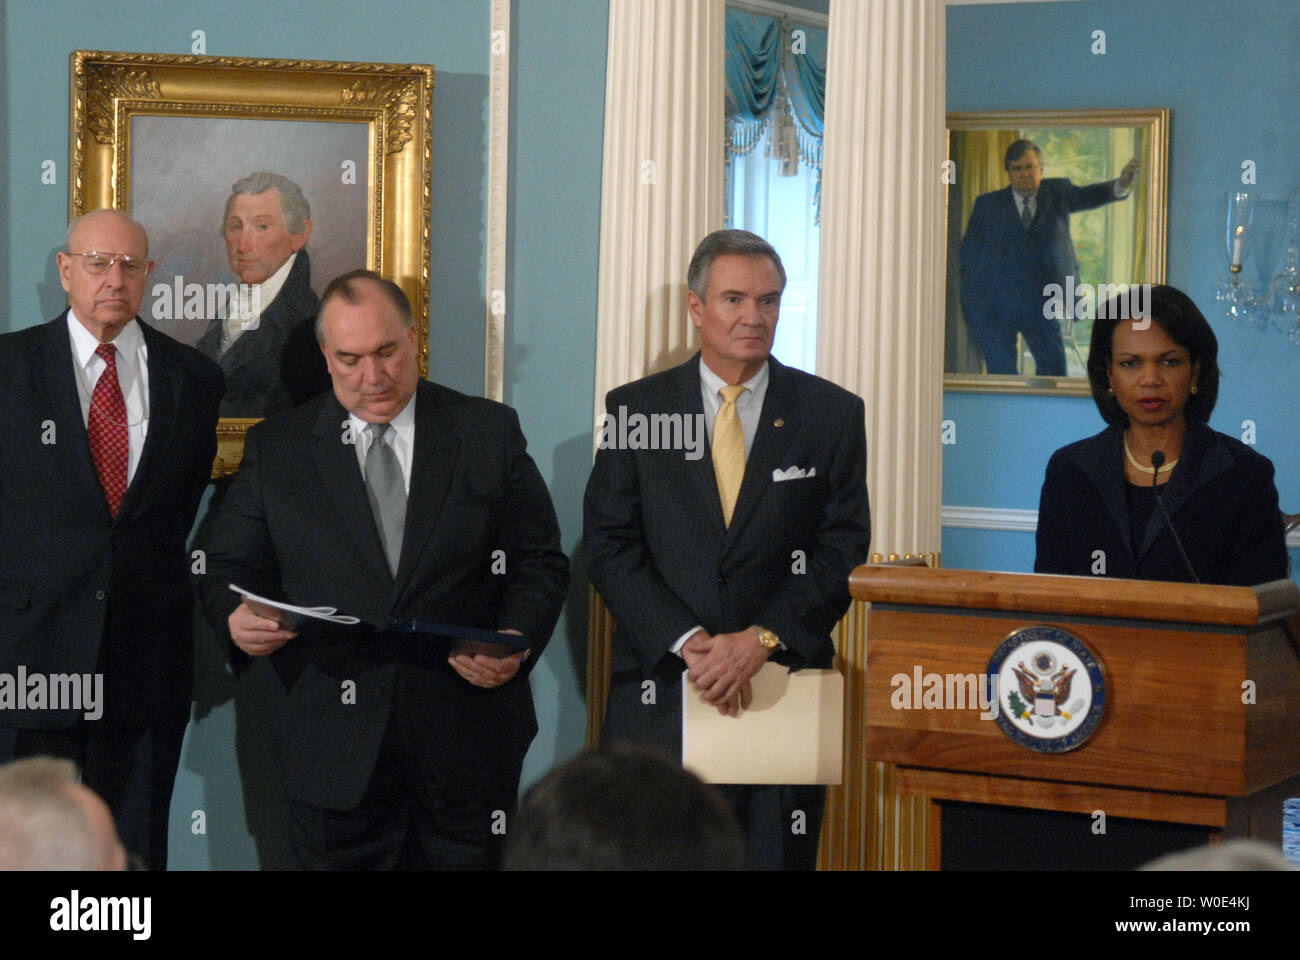 U.S. Secretary of State Condoleezza Rice  (R) speaks alongside members of the Advisory Committee on Transformational Diplomacy including co-chairmen John Breaux (2nd-R) and John Engler (2nd-L) and member Thomas Pickering after the advisory delivered their final report at the State Department in Washington on January 29, 2008. The advisory was formed to help transition the State Department's diplomatic practices into the 21st century.  (UPI Photo/Kevin Dietsch) Stock Photo